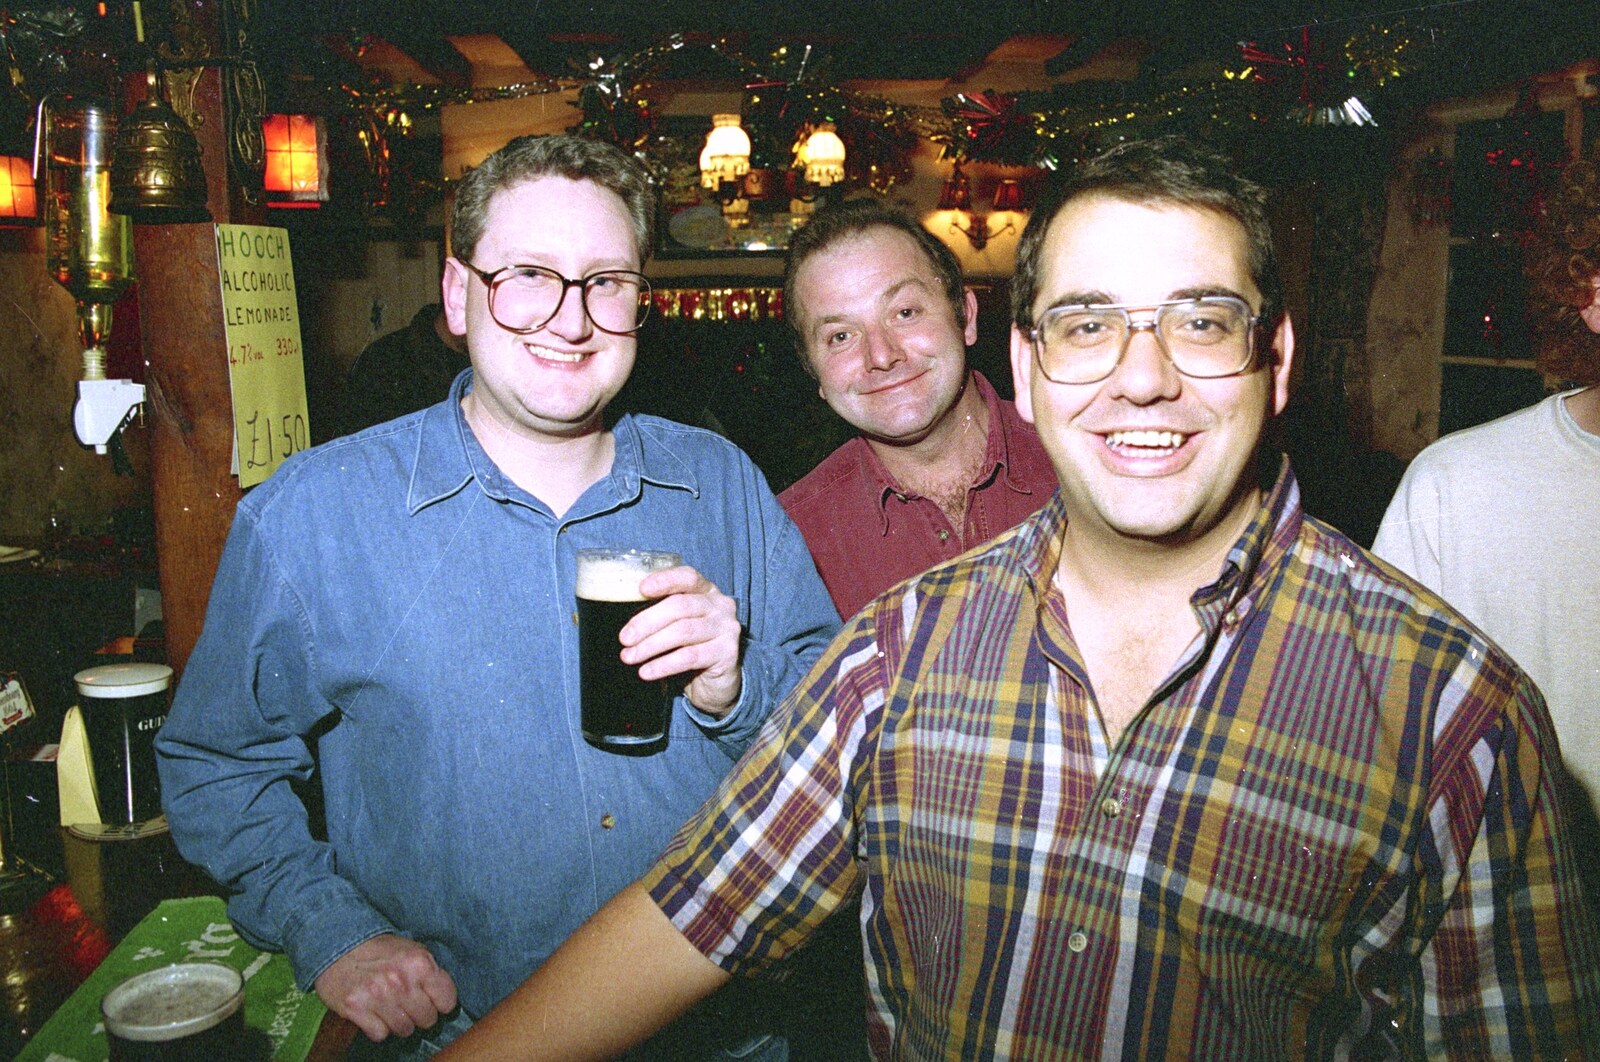 Graham, Ian and Roger from New Year's Eve in the Swan Inn, Brome, Suffolk - 31st December 1995